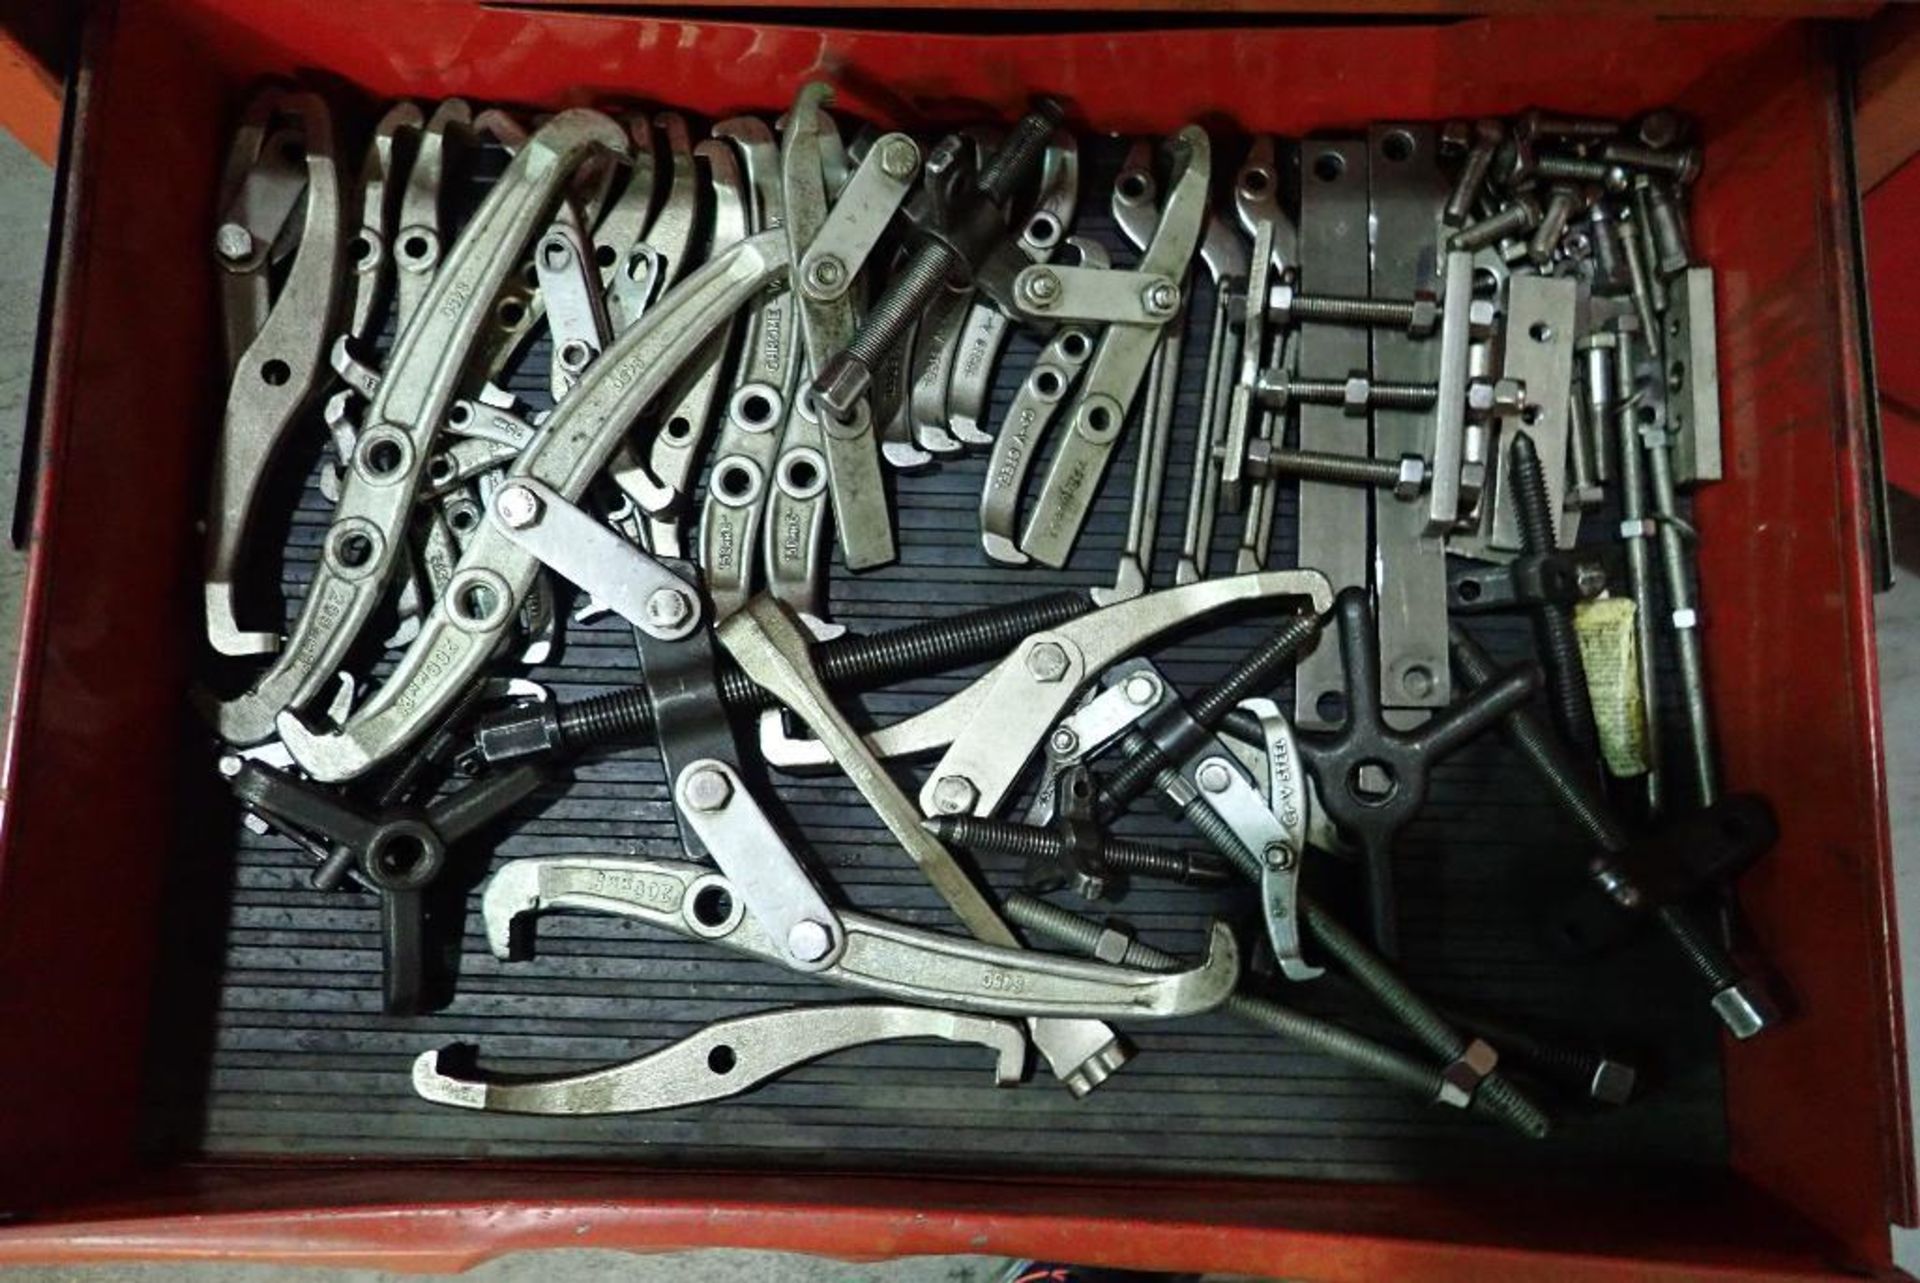 (2) tool chests with contents, wrenches, sockets, drill bits screw drivers, air tools, hammers, plie - Image 29 of 31